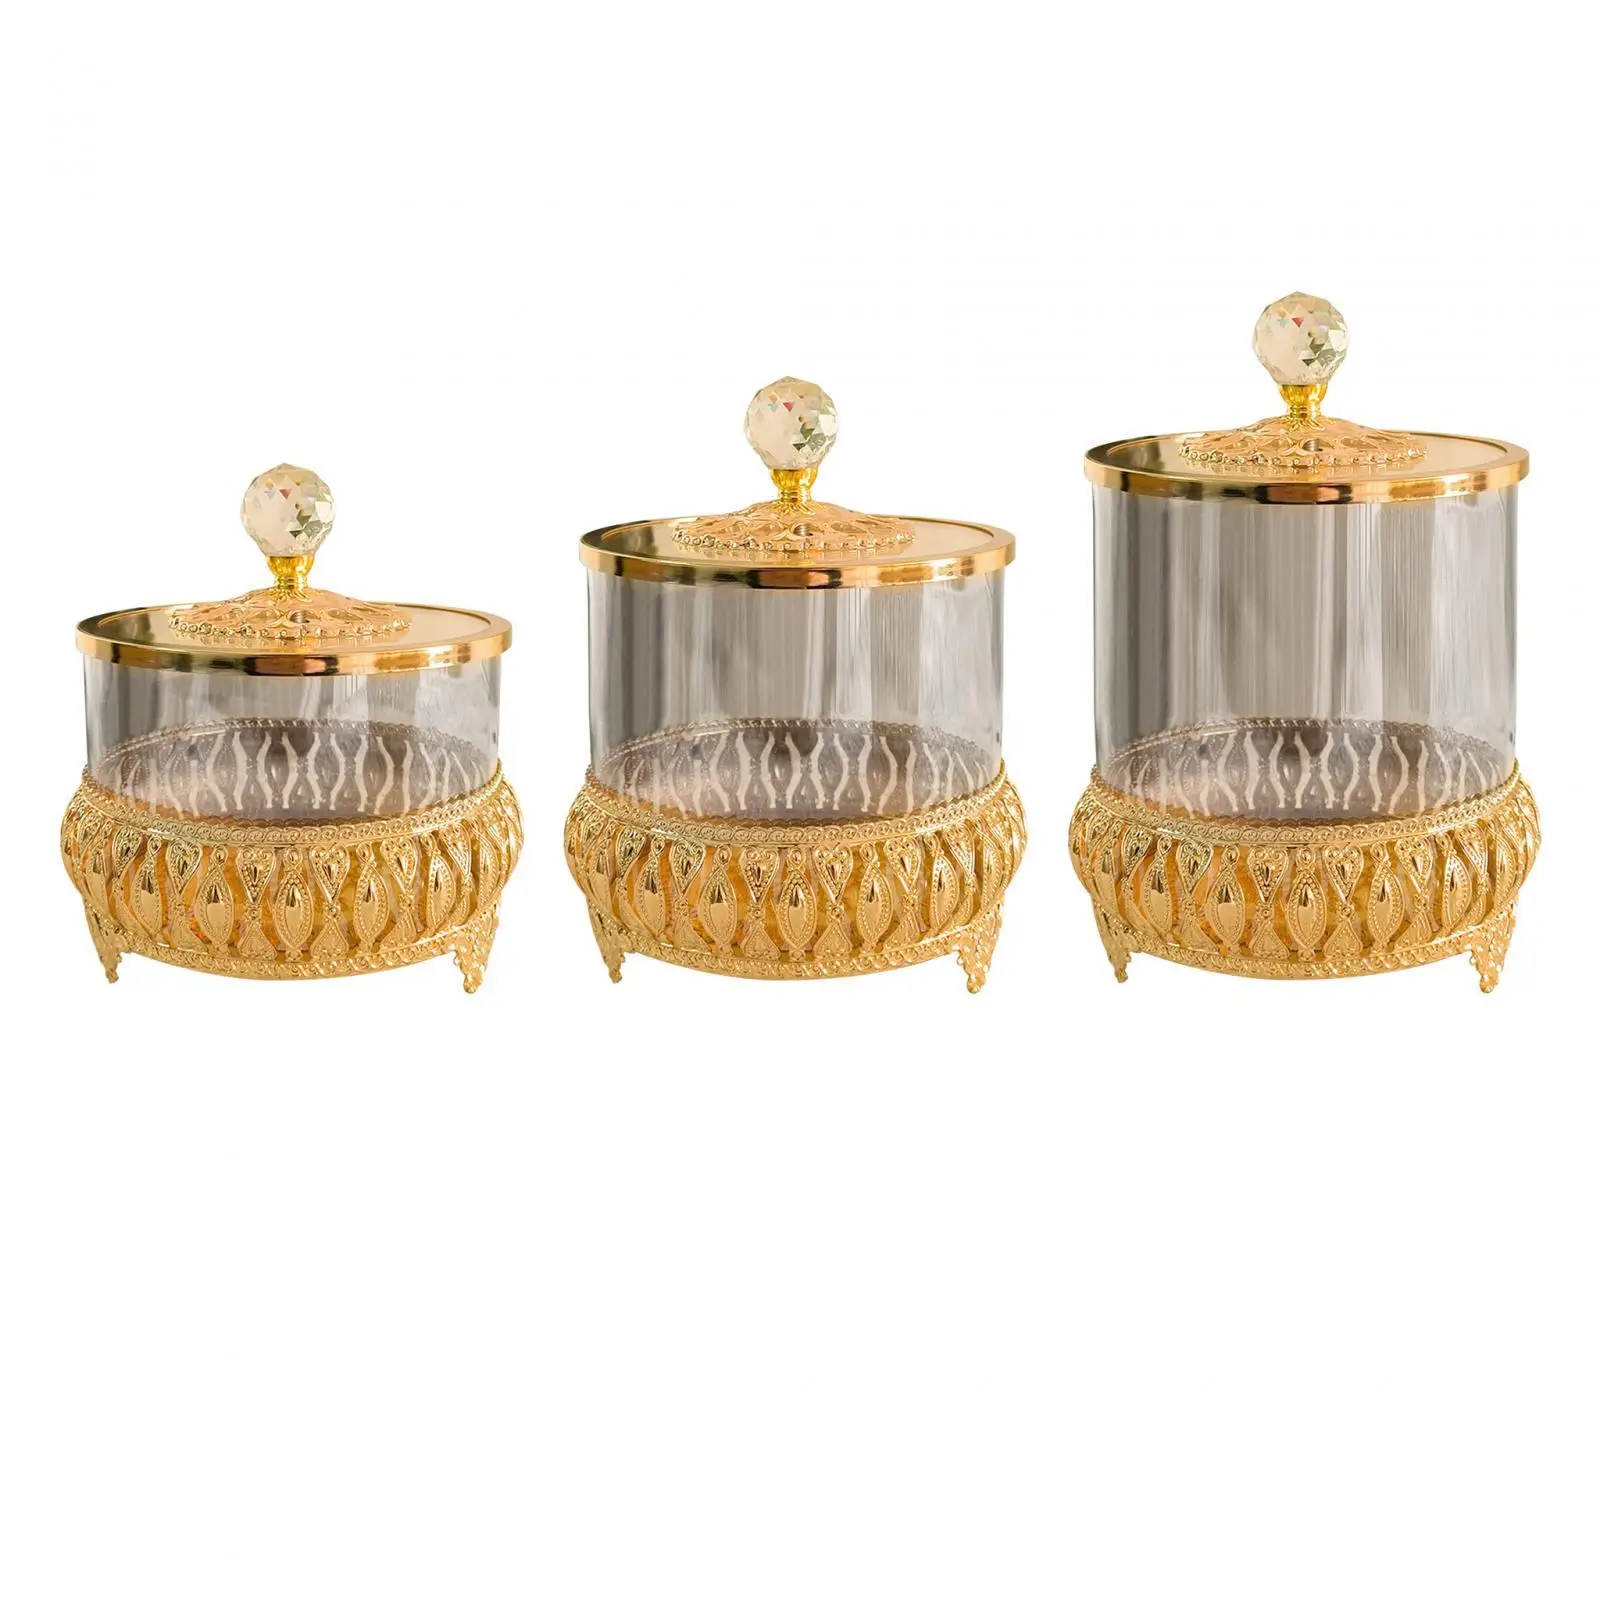 Glass Storage Jars Luxurious Transparent Sugar Bowl with Lid Food Canisters for Dining Table Wedding Bedroom Vanity